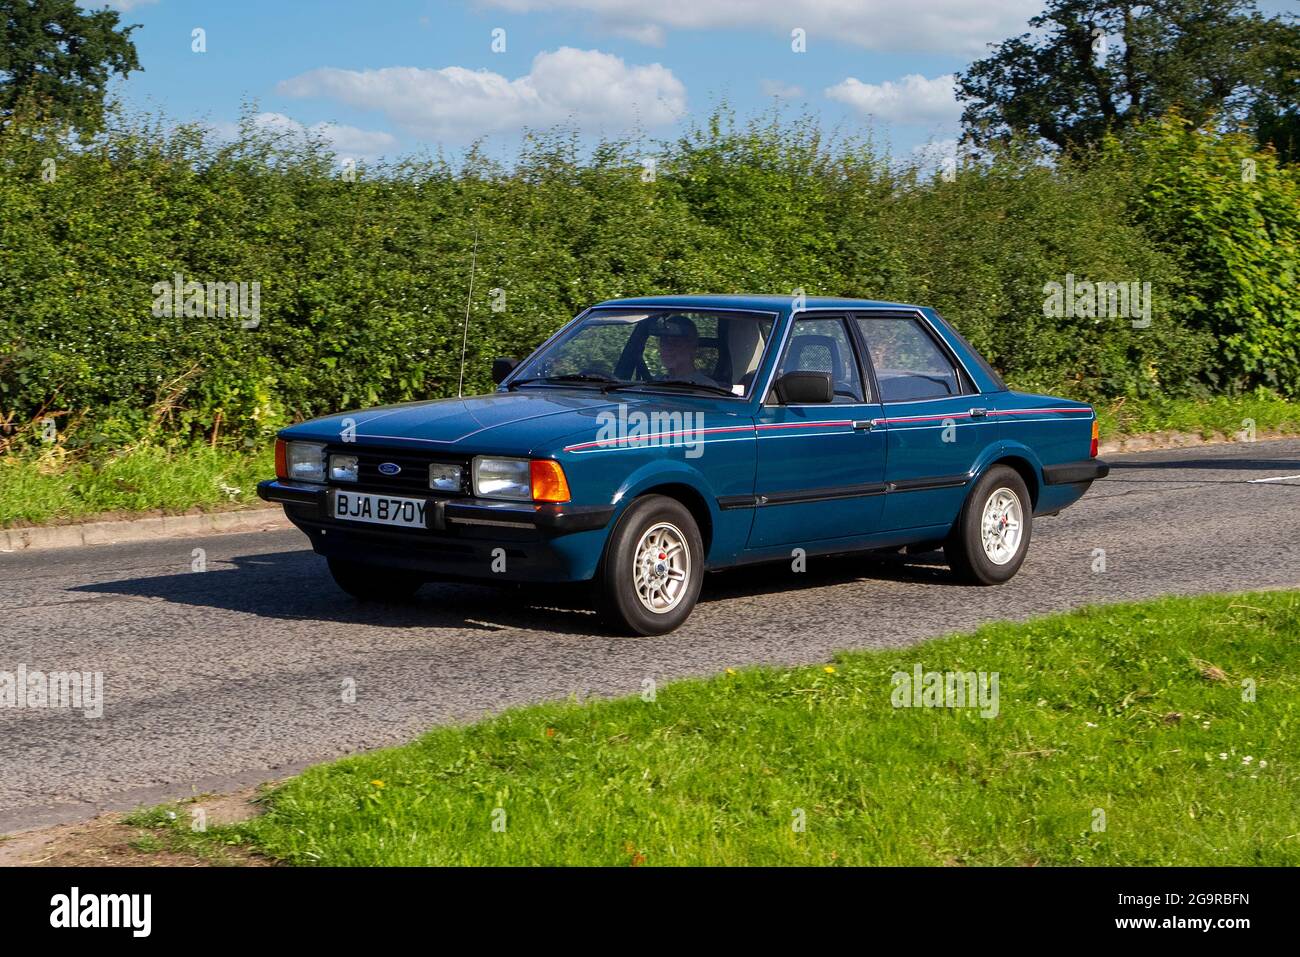 1982 80s blue Ford Cortina vehicle en-route to Capesthorne Hall classic July car show, Cheshire, UK Stock Photo